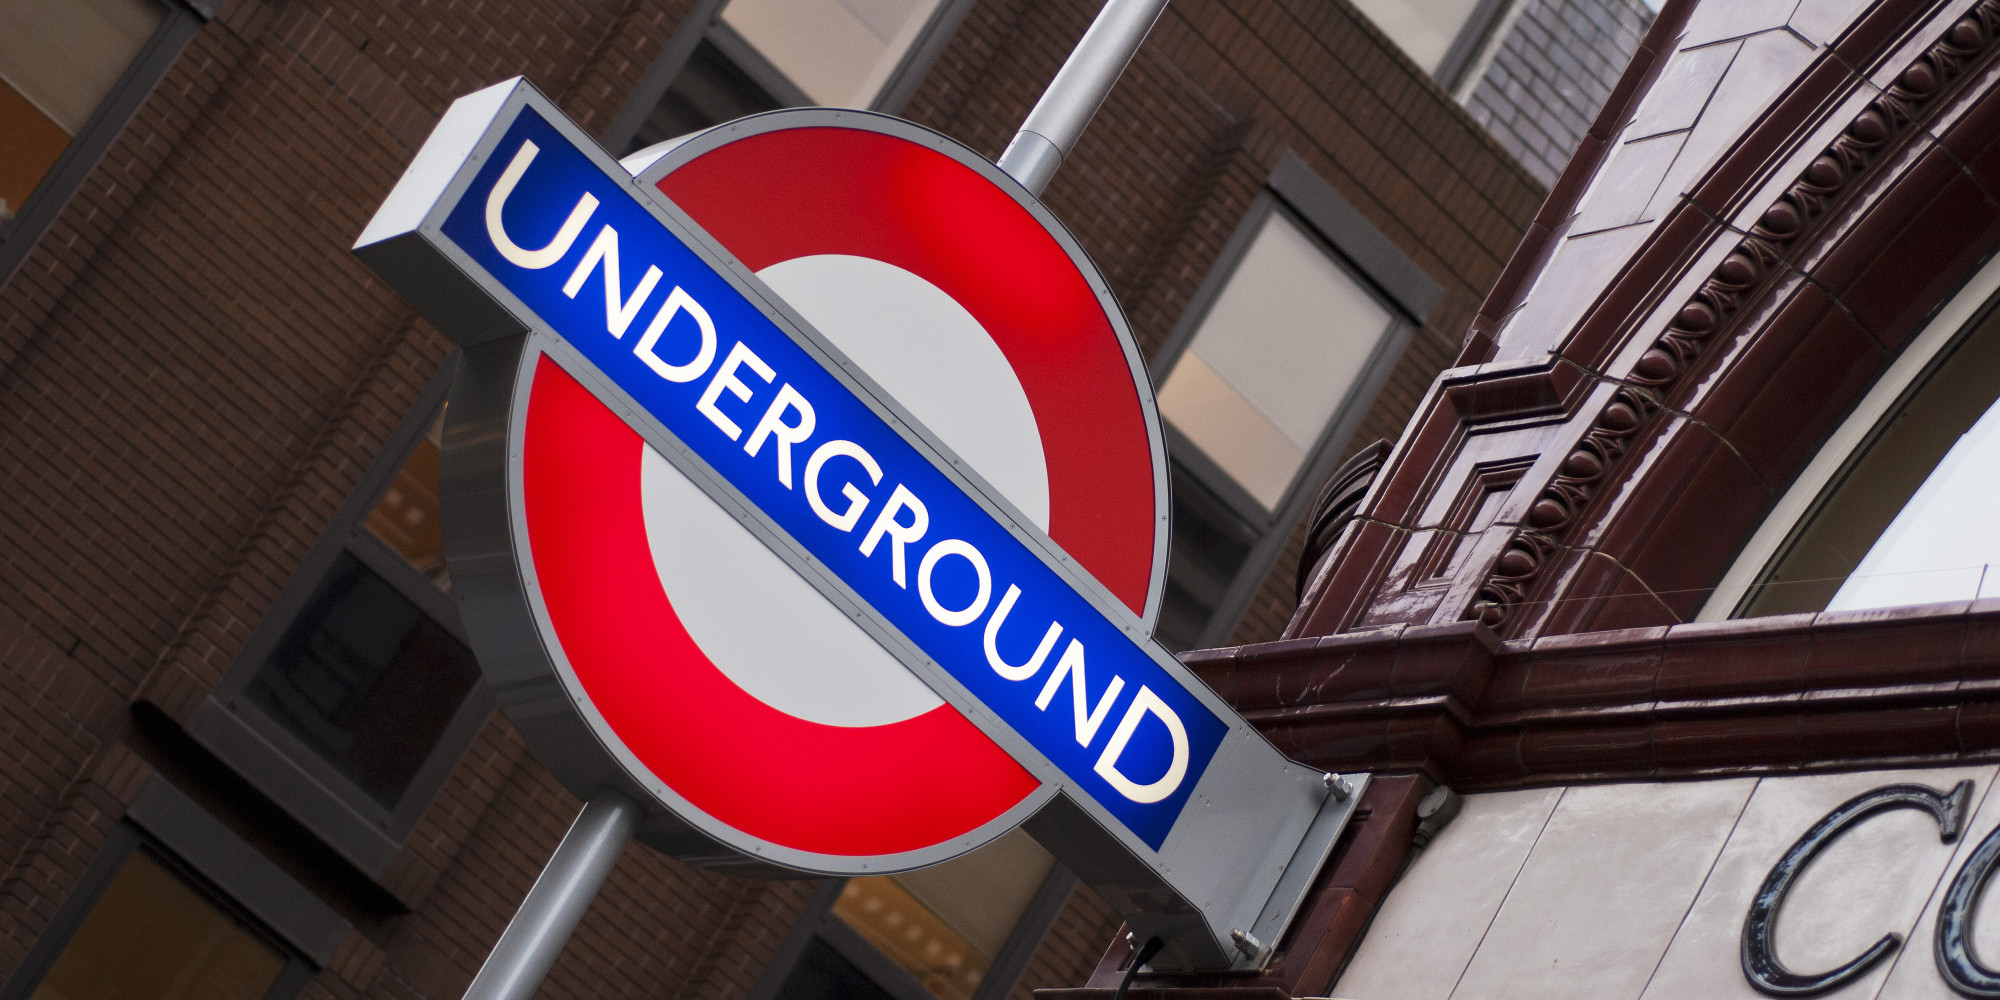 London Underground To Run 24 Hours At Weekends From 2015 | HuffPost UK